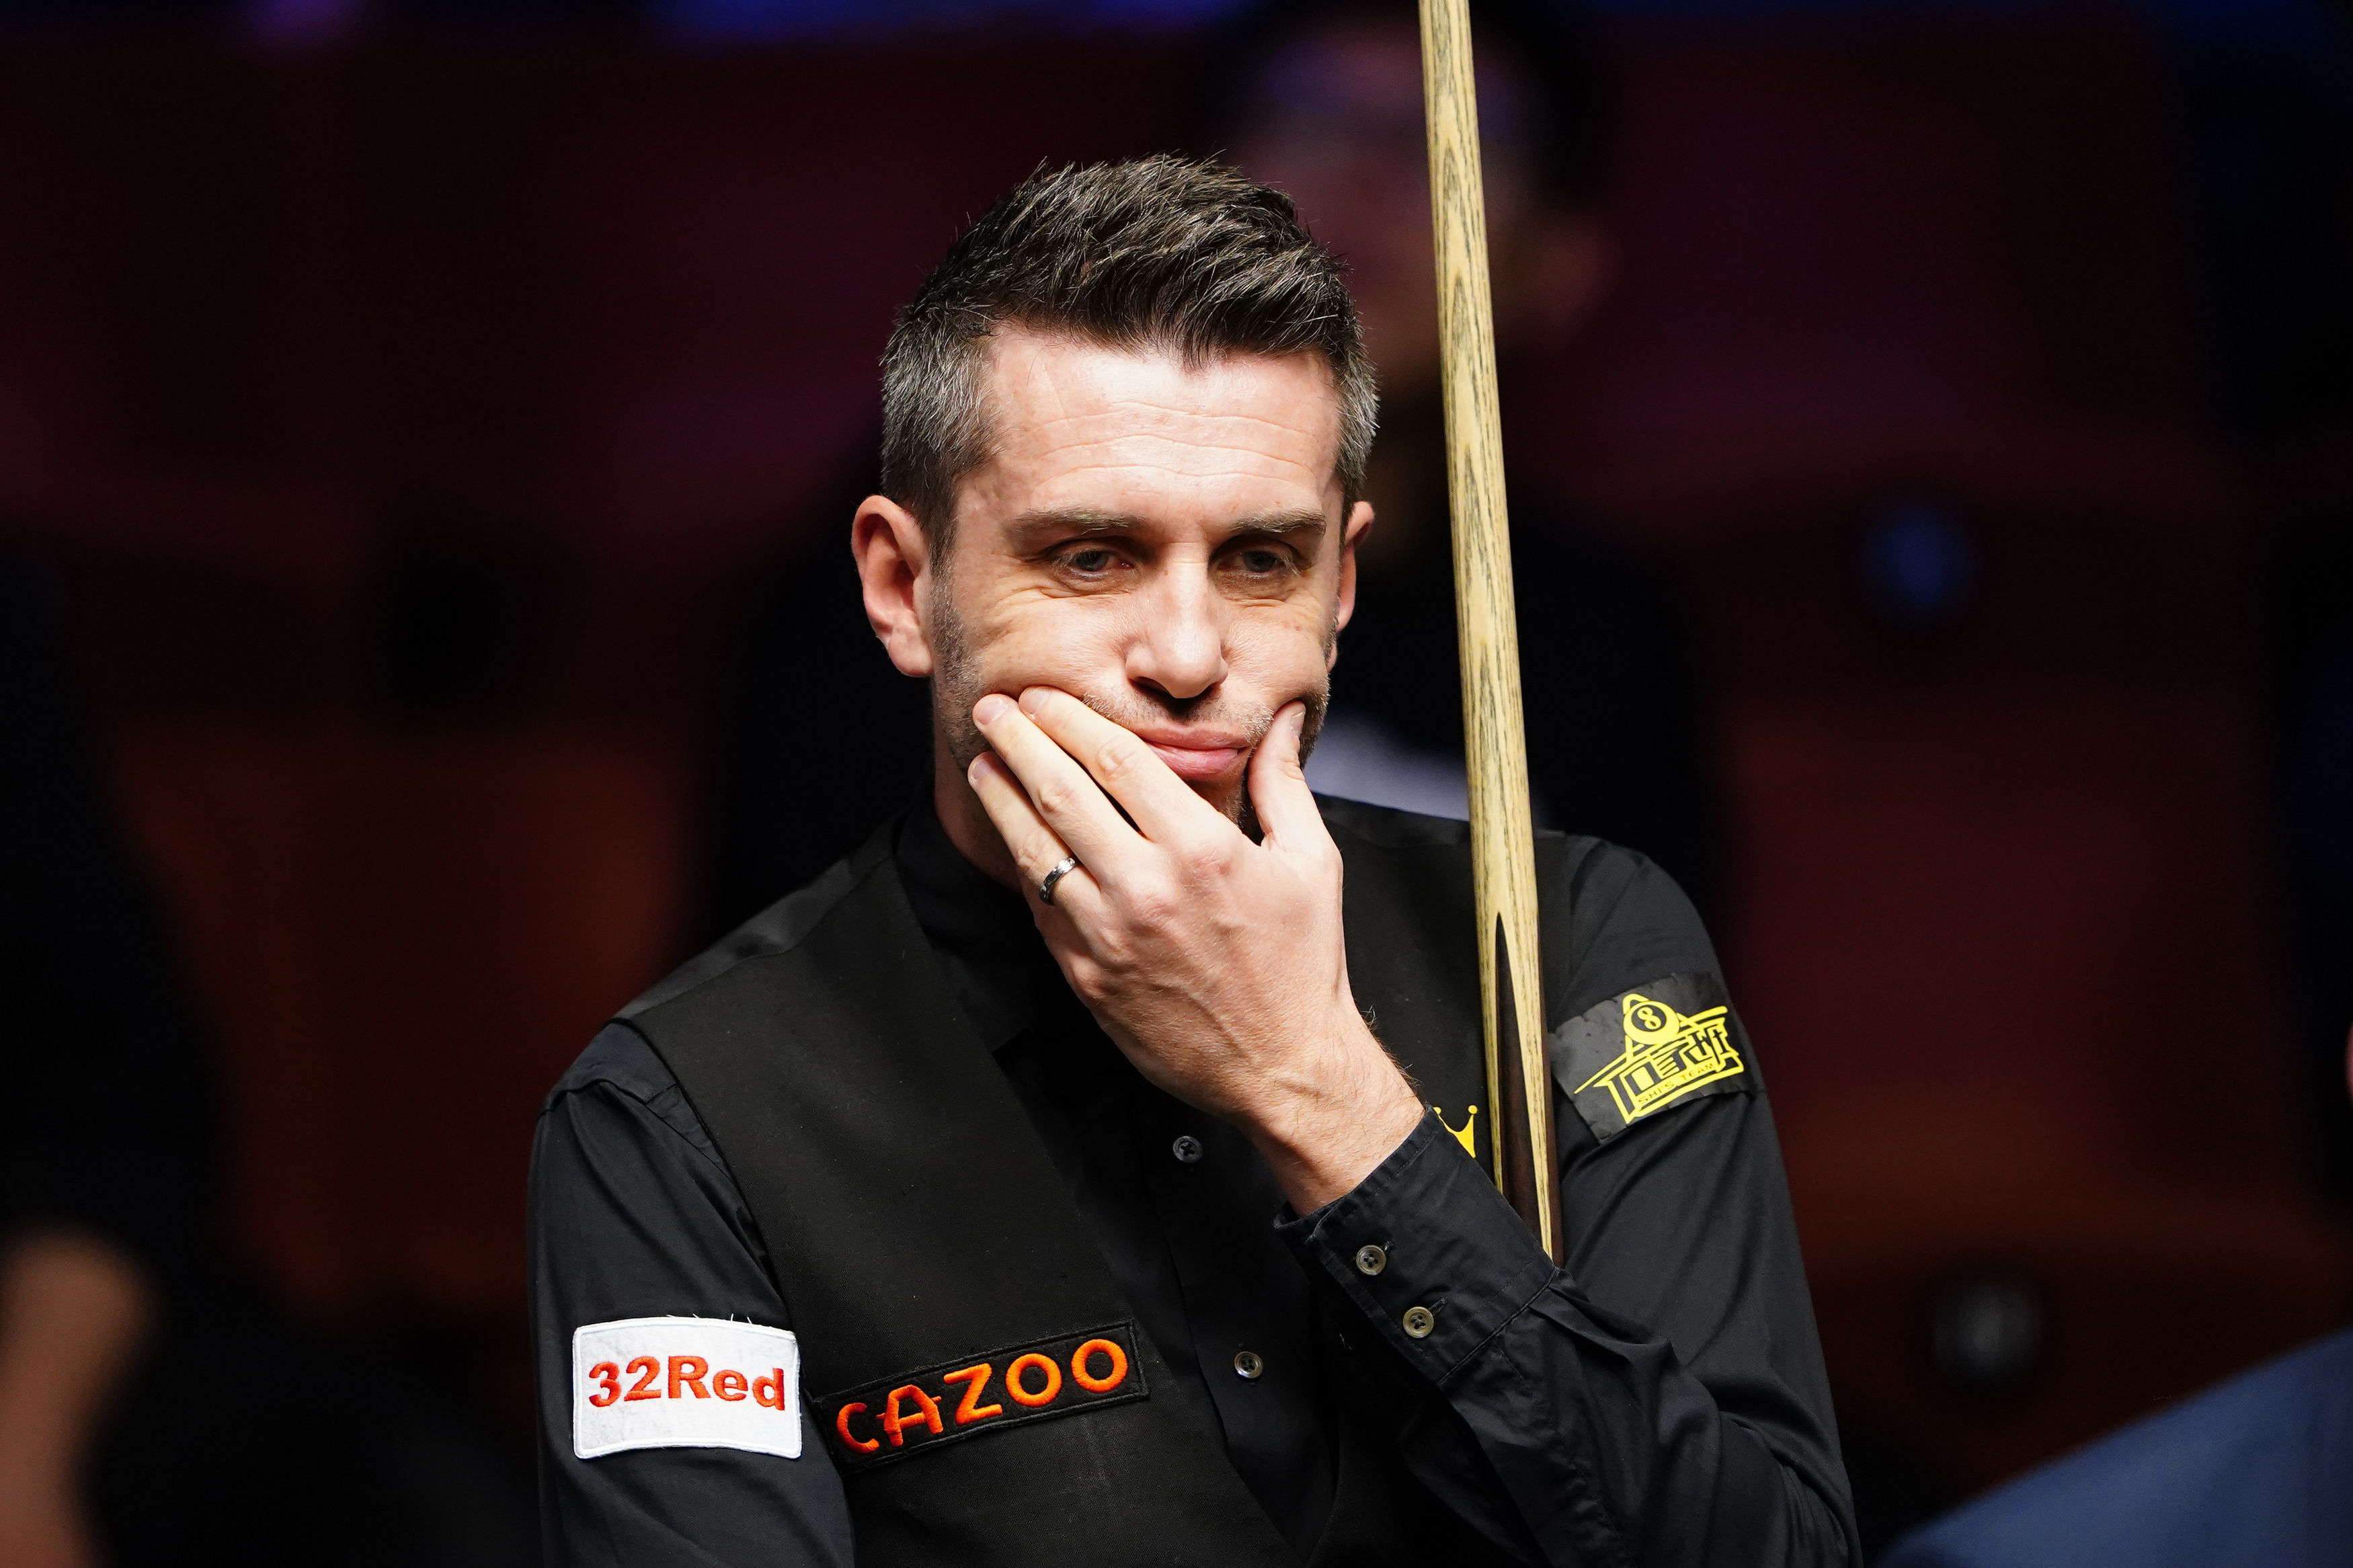 Selby ist viermaliger Snooker-Weltmeister